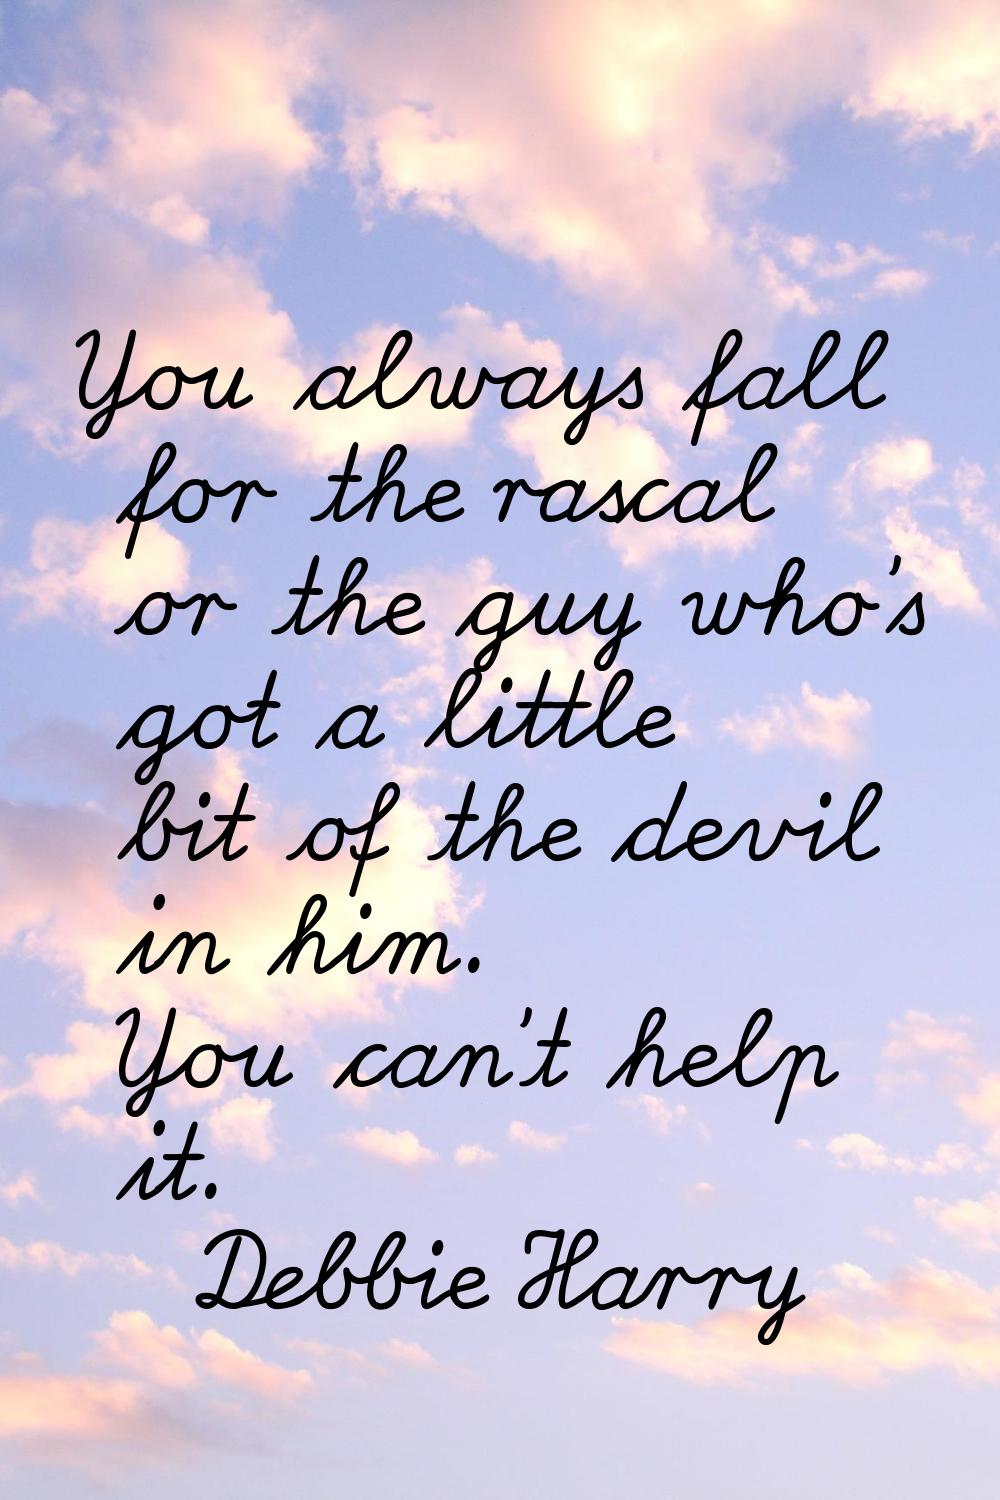 You always fall for the rascal or the guy who's got a little bit of the devil in him. You can't hel